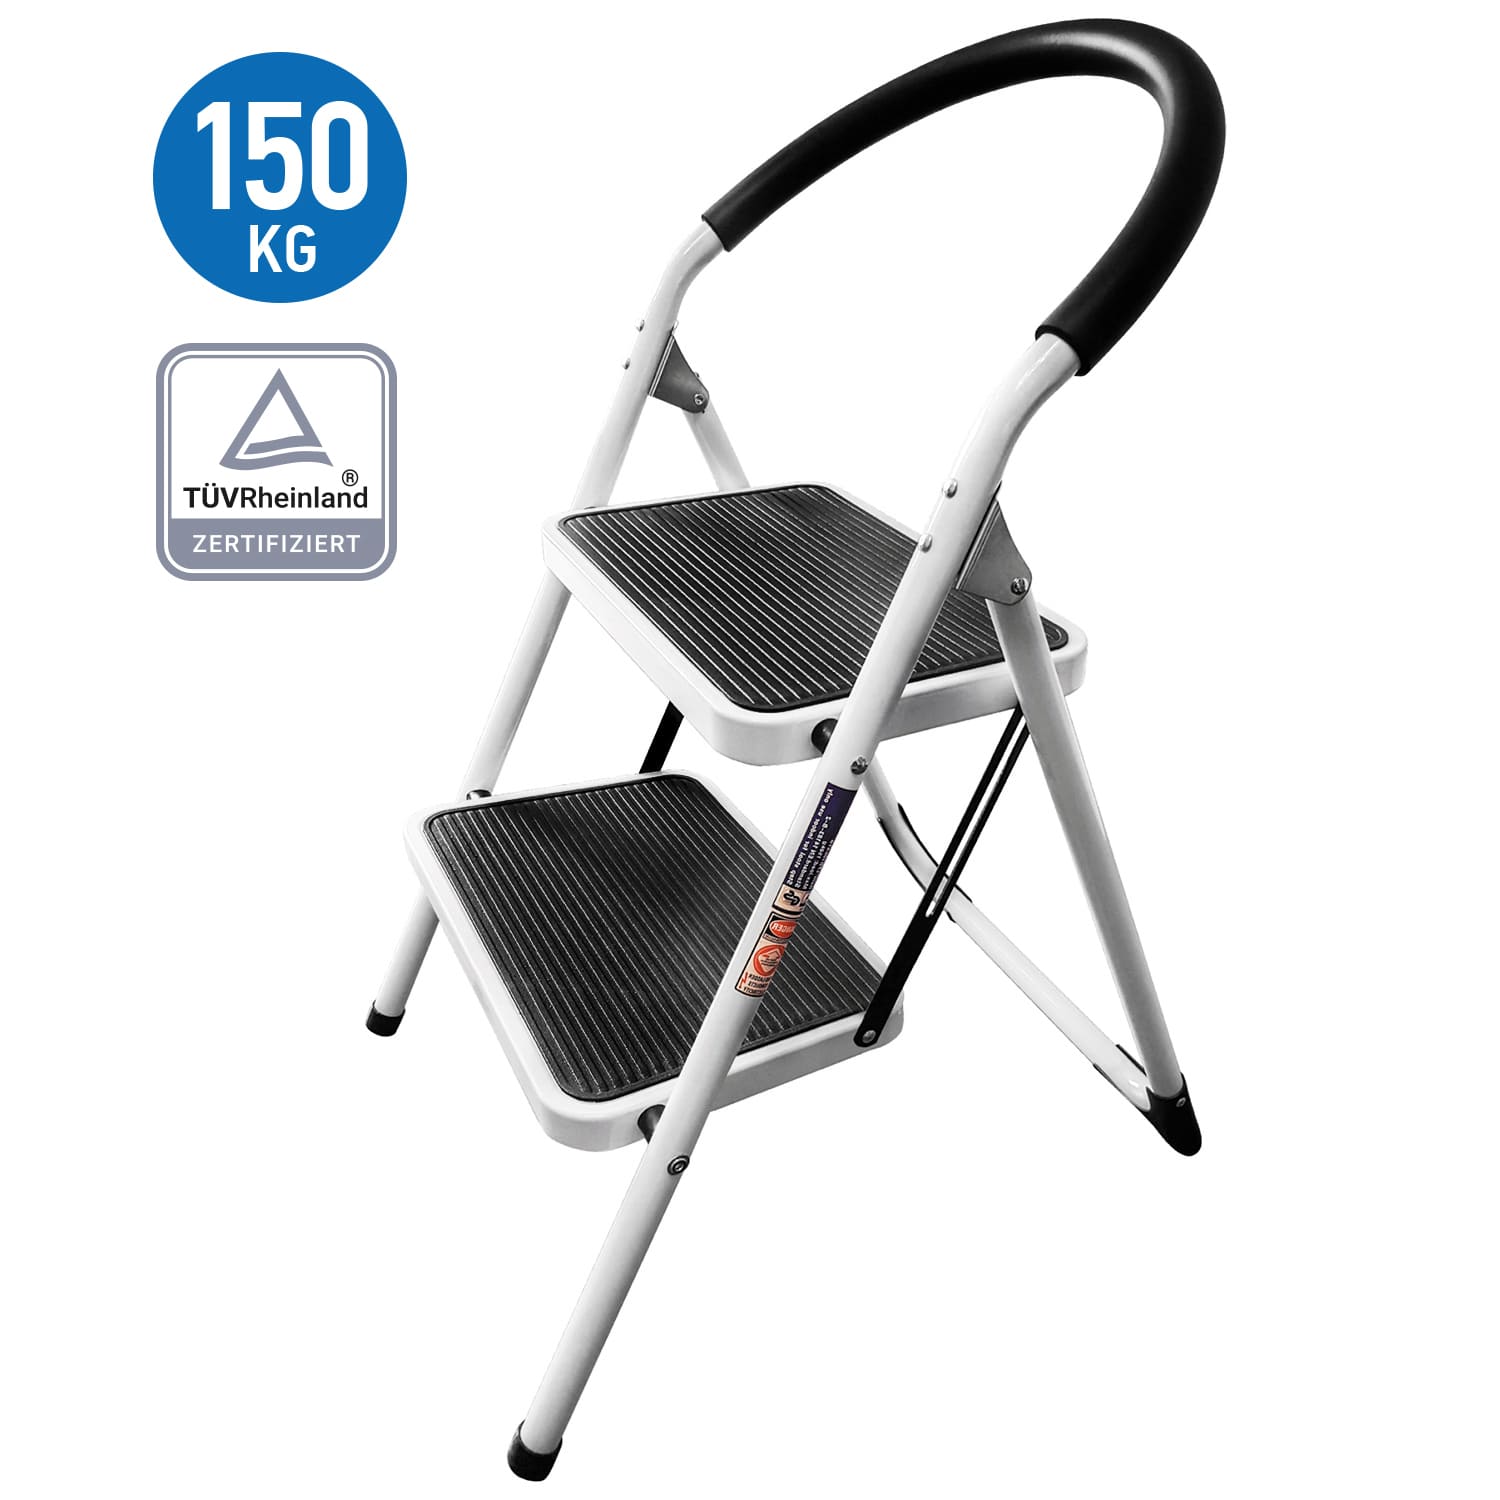 Ladder Heavy duty, can withstand up to 150 kg, WonderWorker Barrow